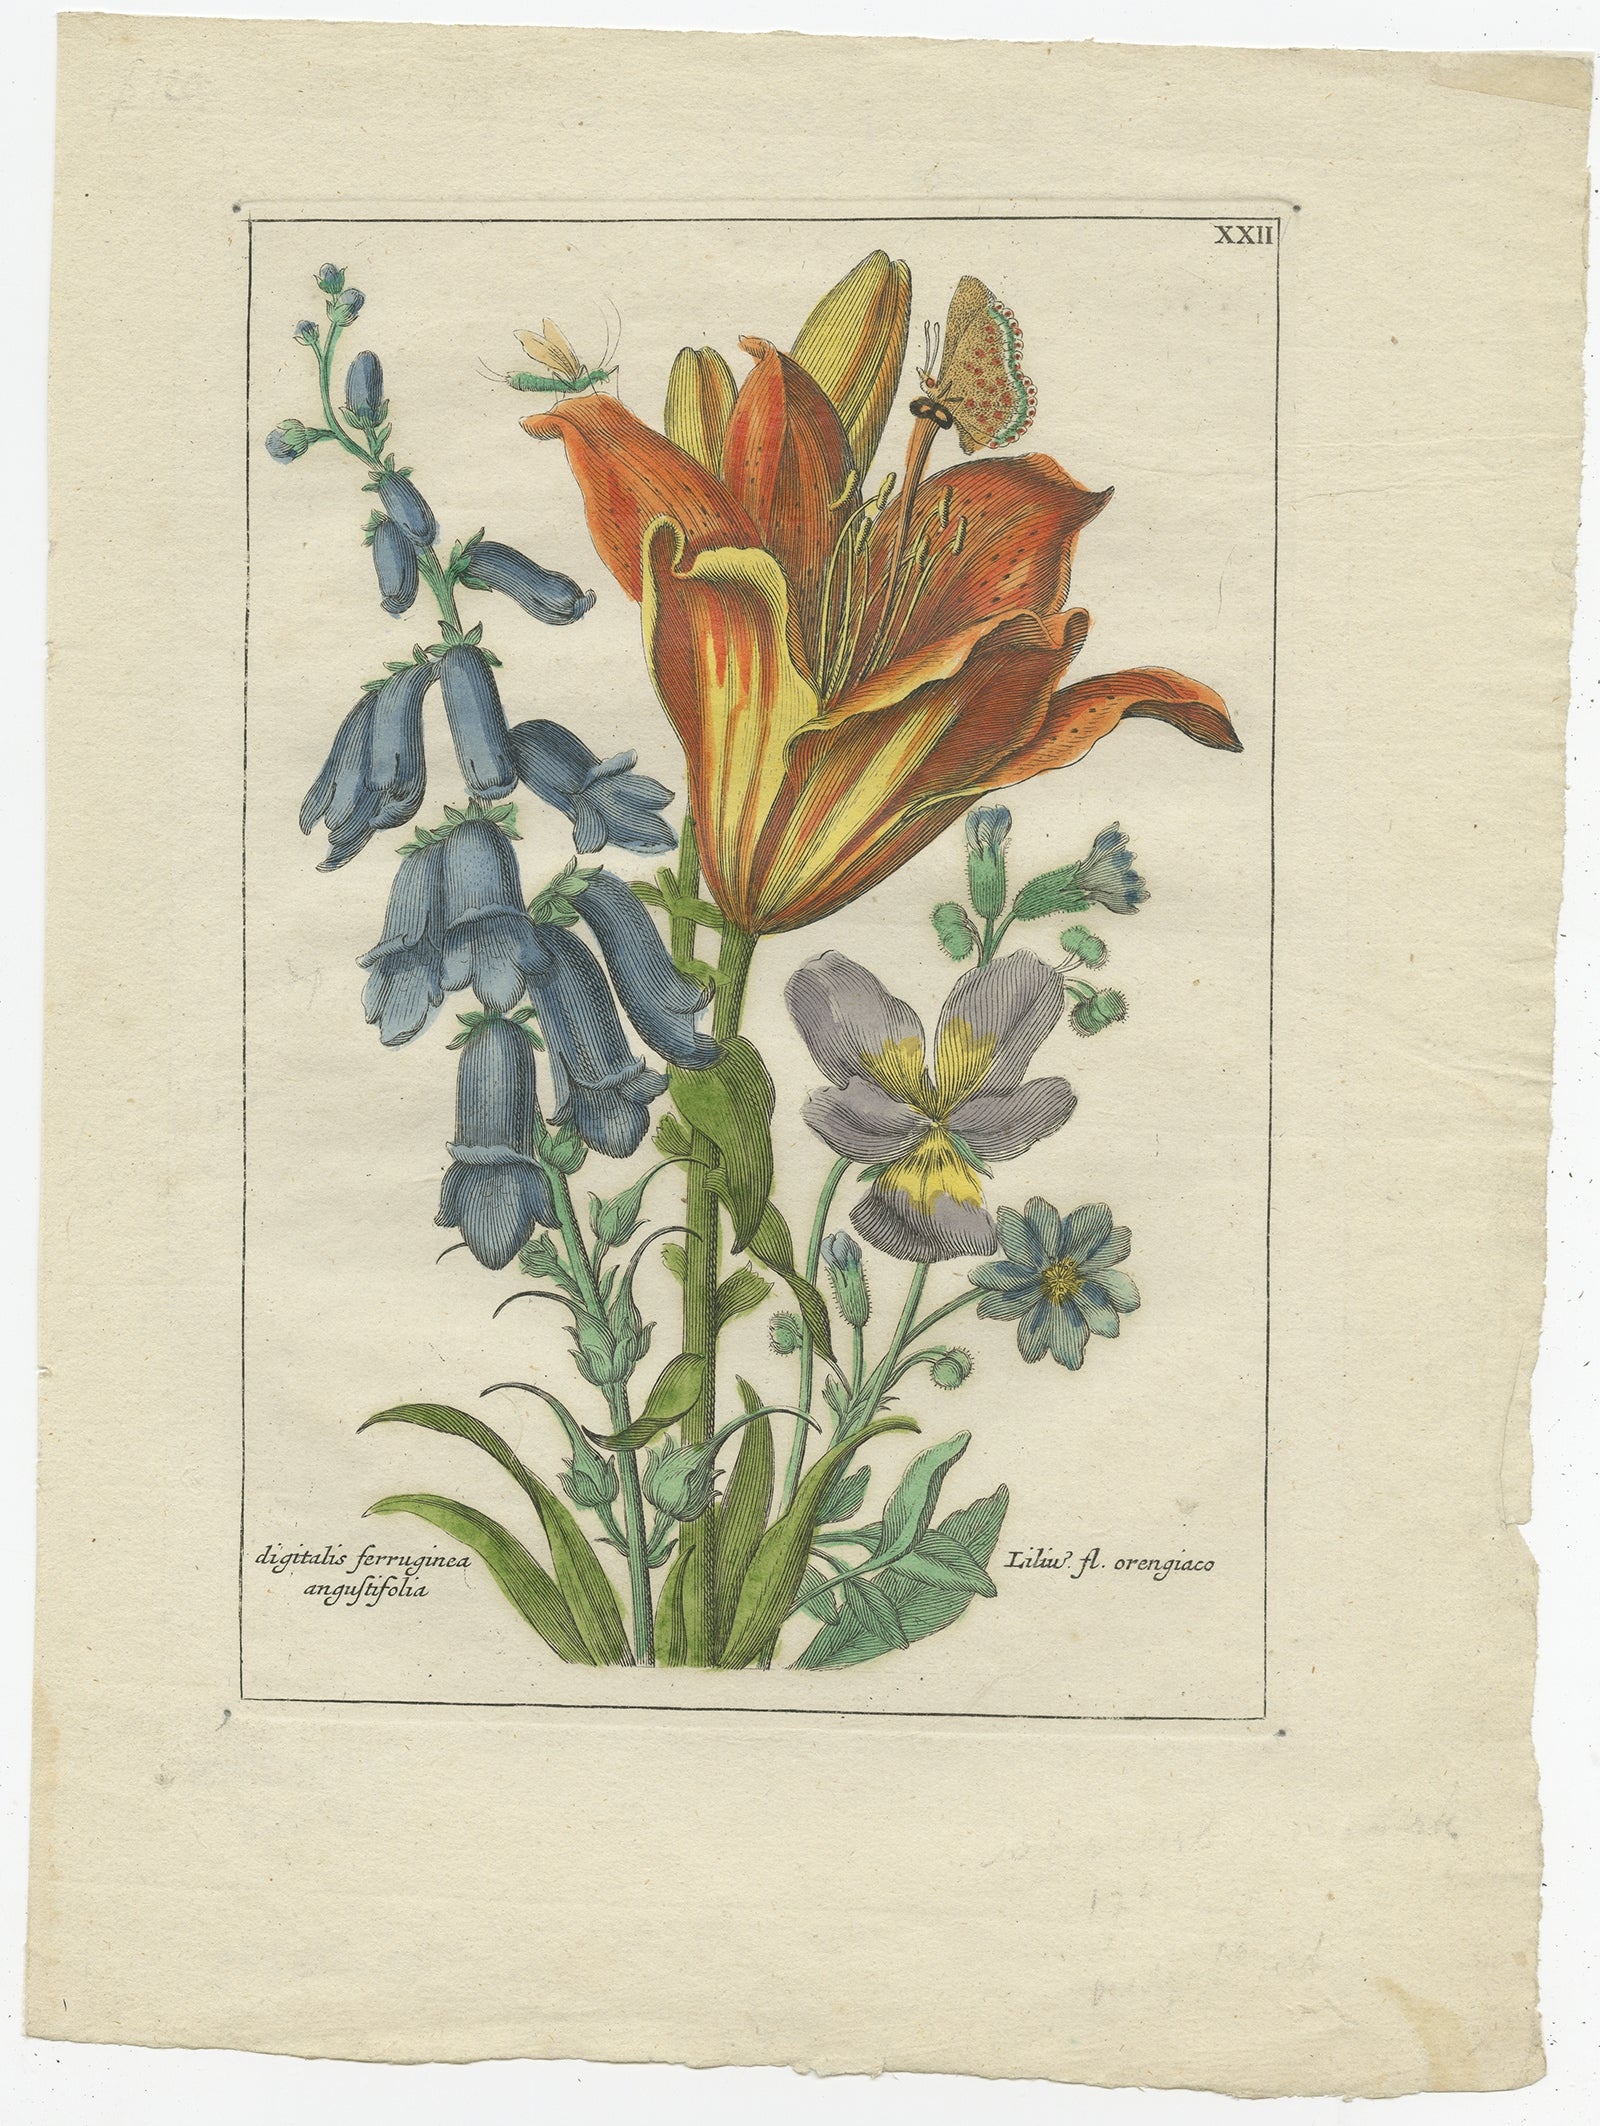 Untitled antique botany print of Lilium orengiaco (the orange lily) and Digitalis ferruginea angustifolia. 

This print originates from 'Nederlandsch Bloemwerk' by J.B. Elwe. This work showcases the very most spectacular tulips, hyacinths,